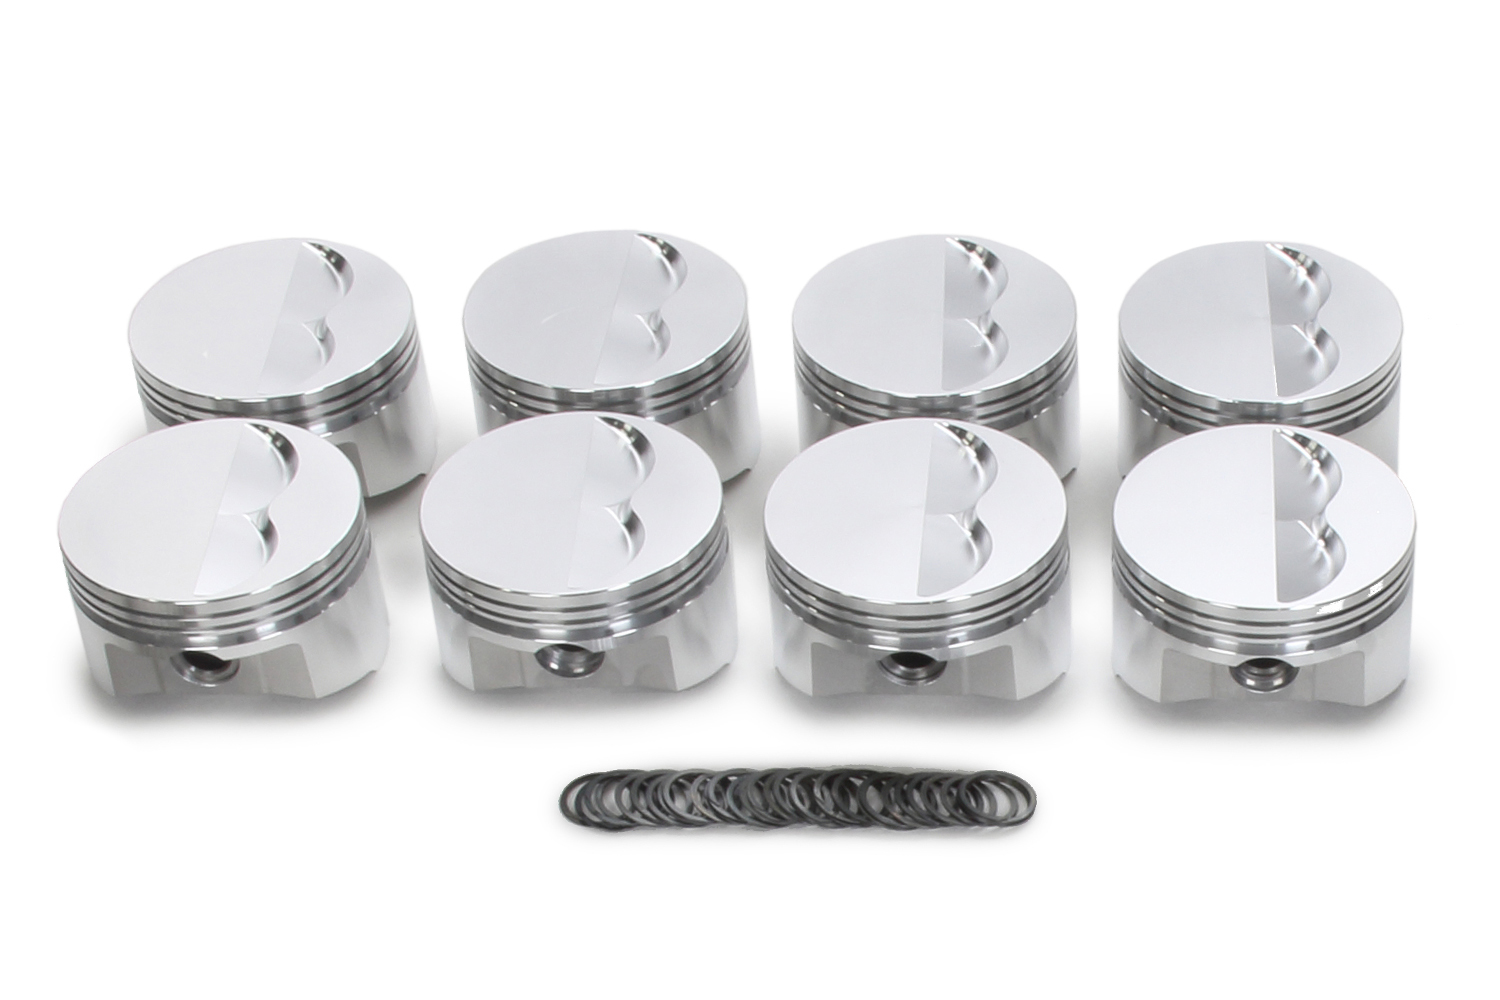 SRP Pistons 138100 Piston, 400 Flat Top, Forged, 4.155 in Bore, 1/16 x 1/16 x 3/16 in Ring Grooves, Minus 5.00 cc, Small Block Chevy, Set of 8